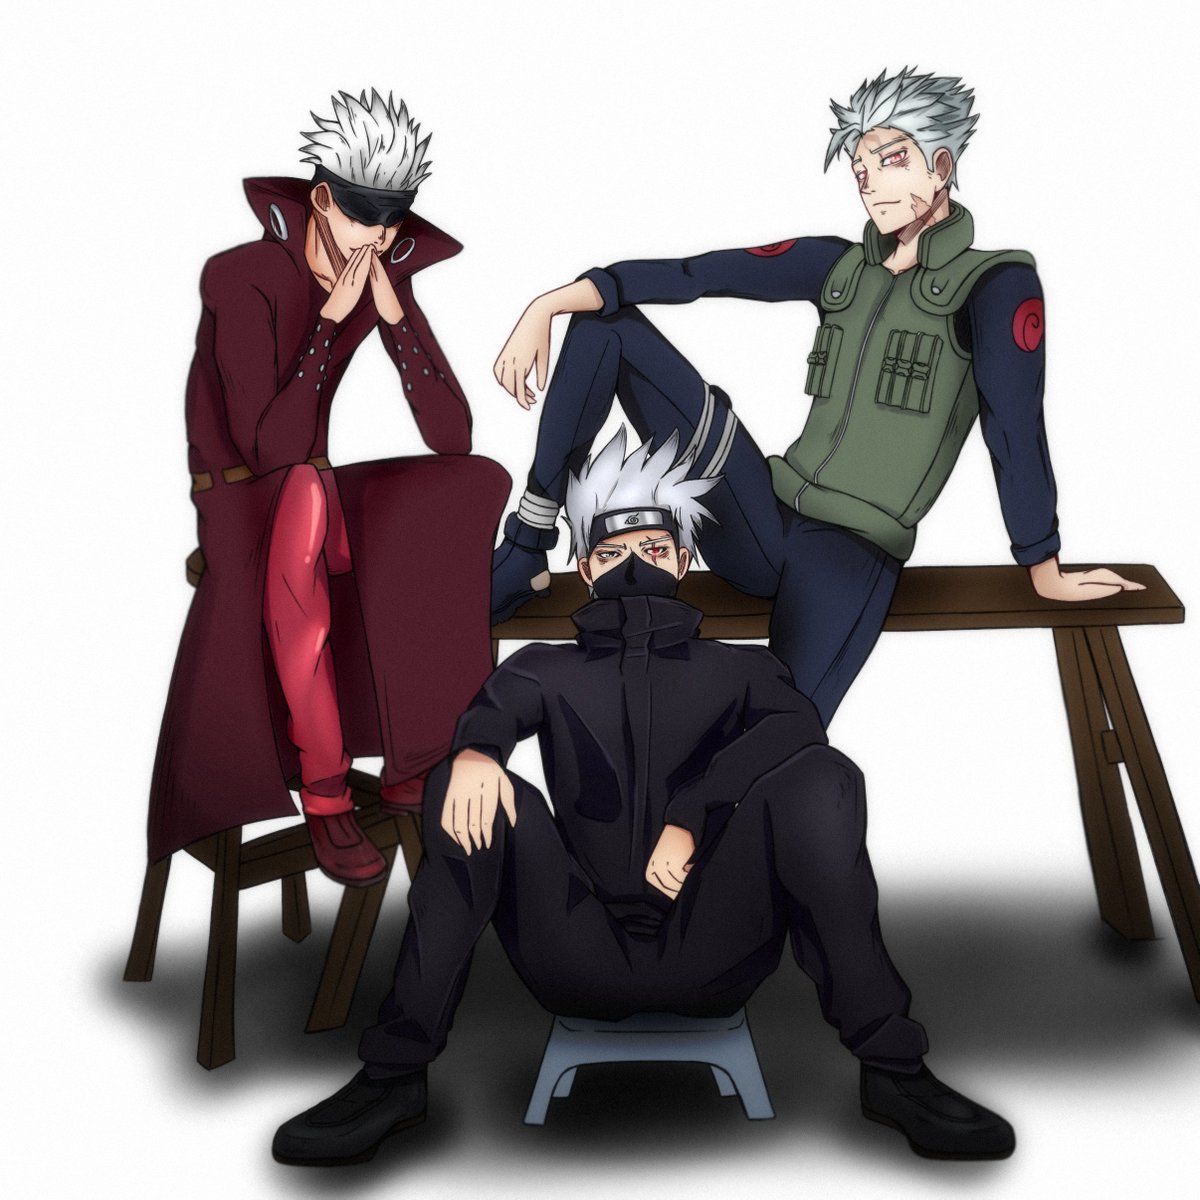 Ban On Twitter Wednesday Spotlight Literally Gojo Kakashi And Ban Wearing Each Other S Uniform Satorugojo Kakashihatake Ban Digitalart Illustration Anime Animeart Animefanart Fanart Artph Https T Co Qxnkouwybr [this poll is to see whose more popular and the hottest, it's not technically about whose stronger i just want to see on who people vote because gojo and kakashi are most loved by some weebs. gojo kakashi and ban wearing each